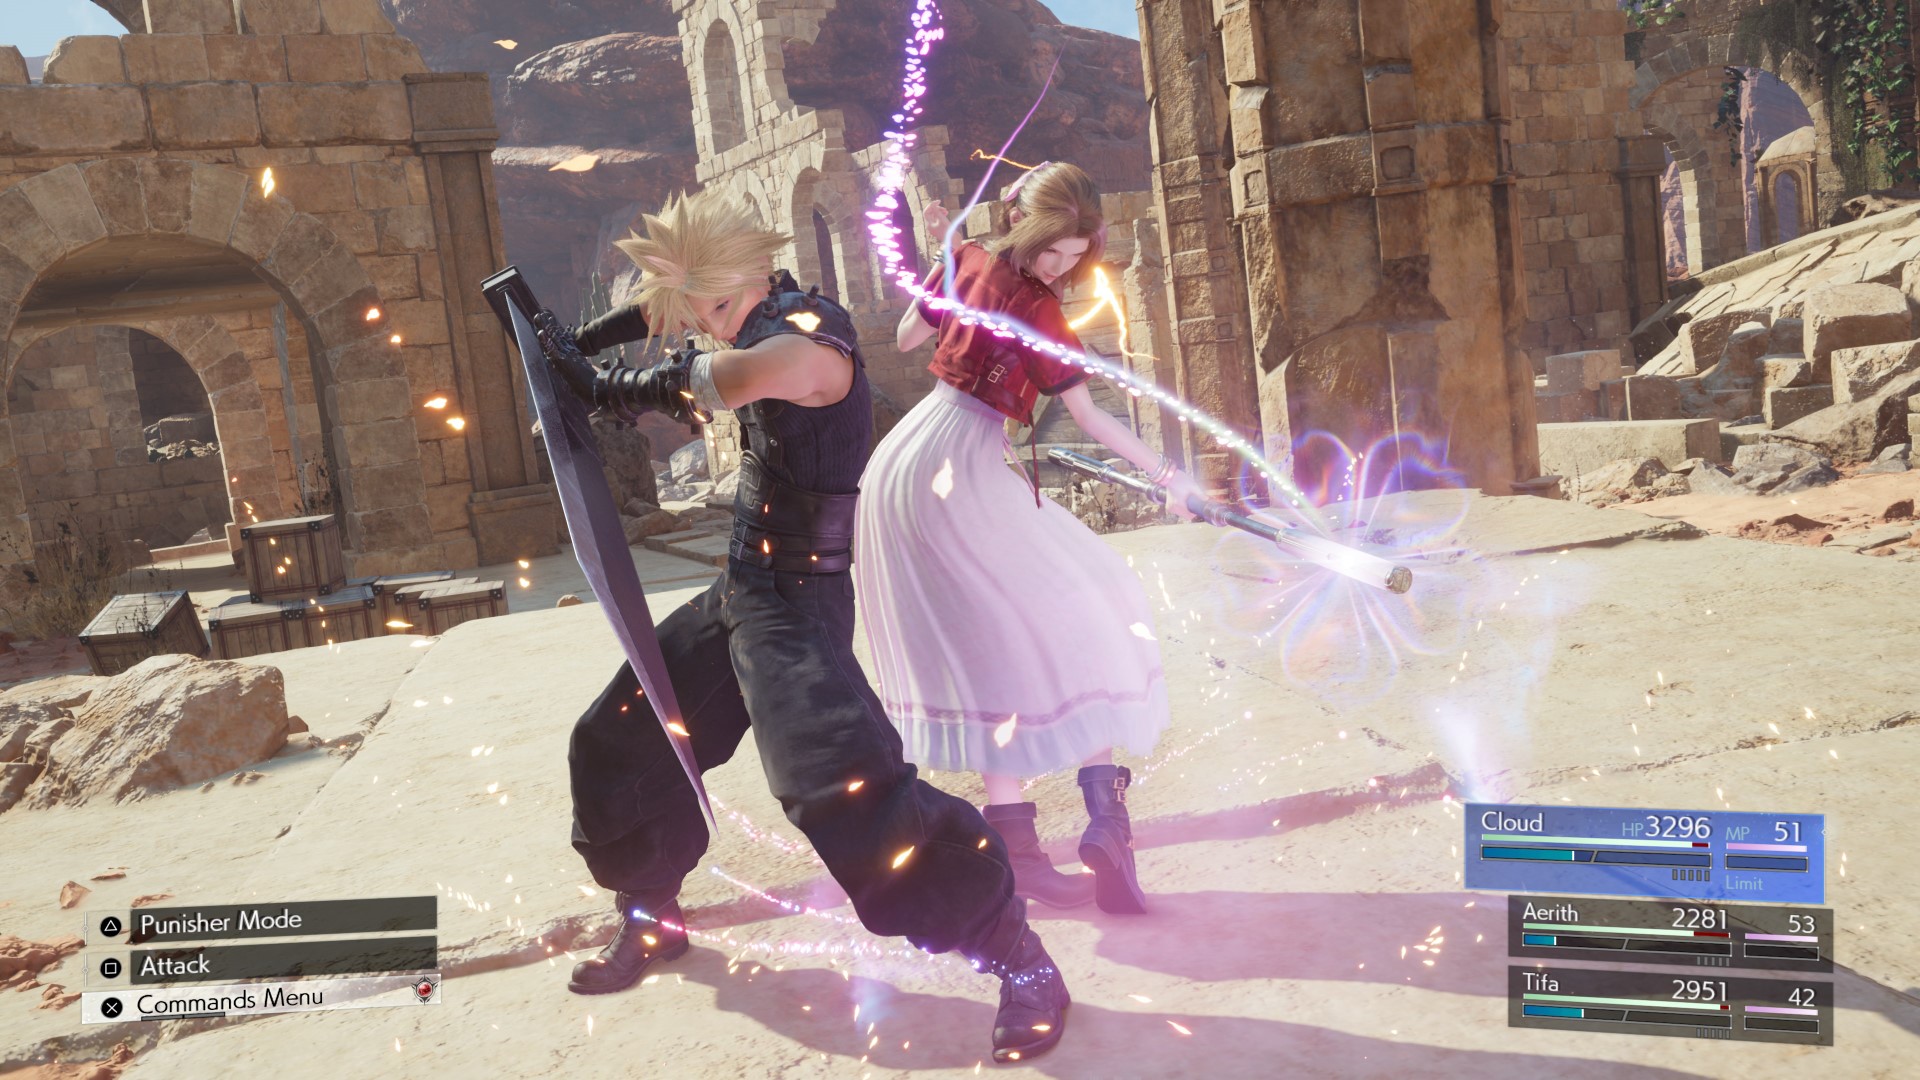 Cloud and Aerith back to back